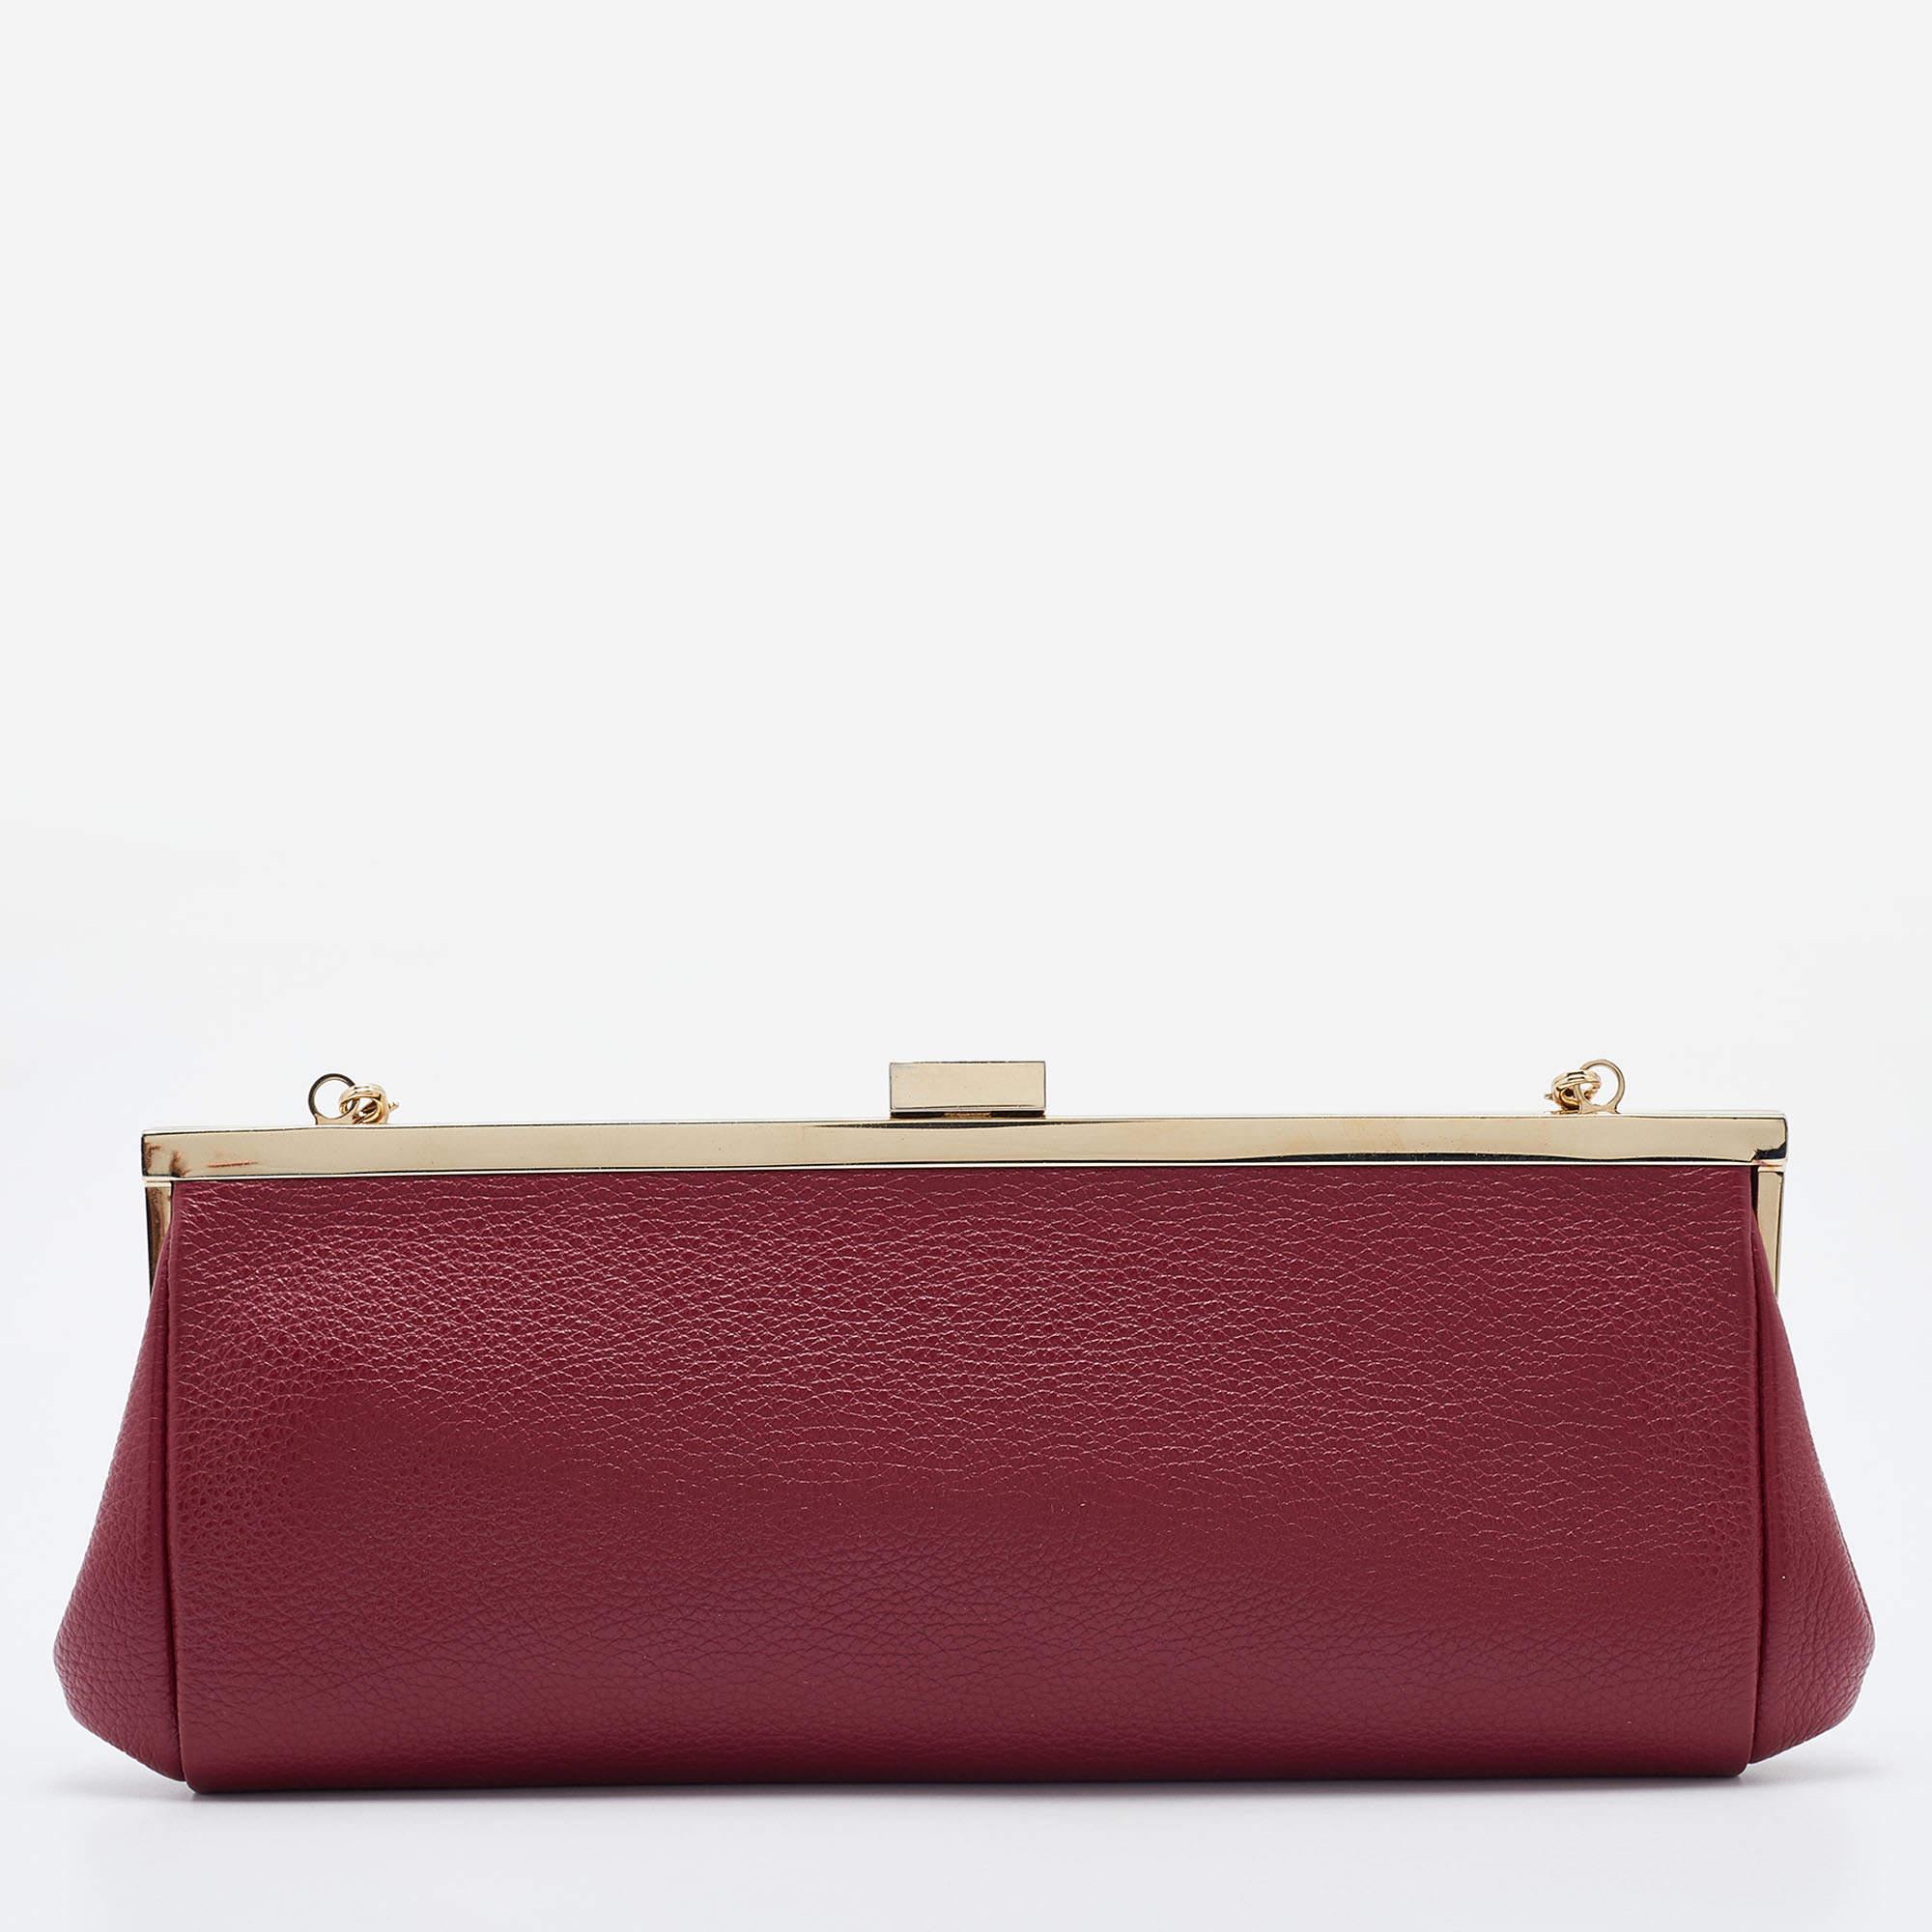 This clutch is just the right accessory to compliment your chic ensemble. It comes crafted in quality material featuring a well-sized interior that can comfortably hold all your little essentials.

Includes: Original Dustbag, Detachable Chain Strap

